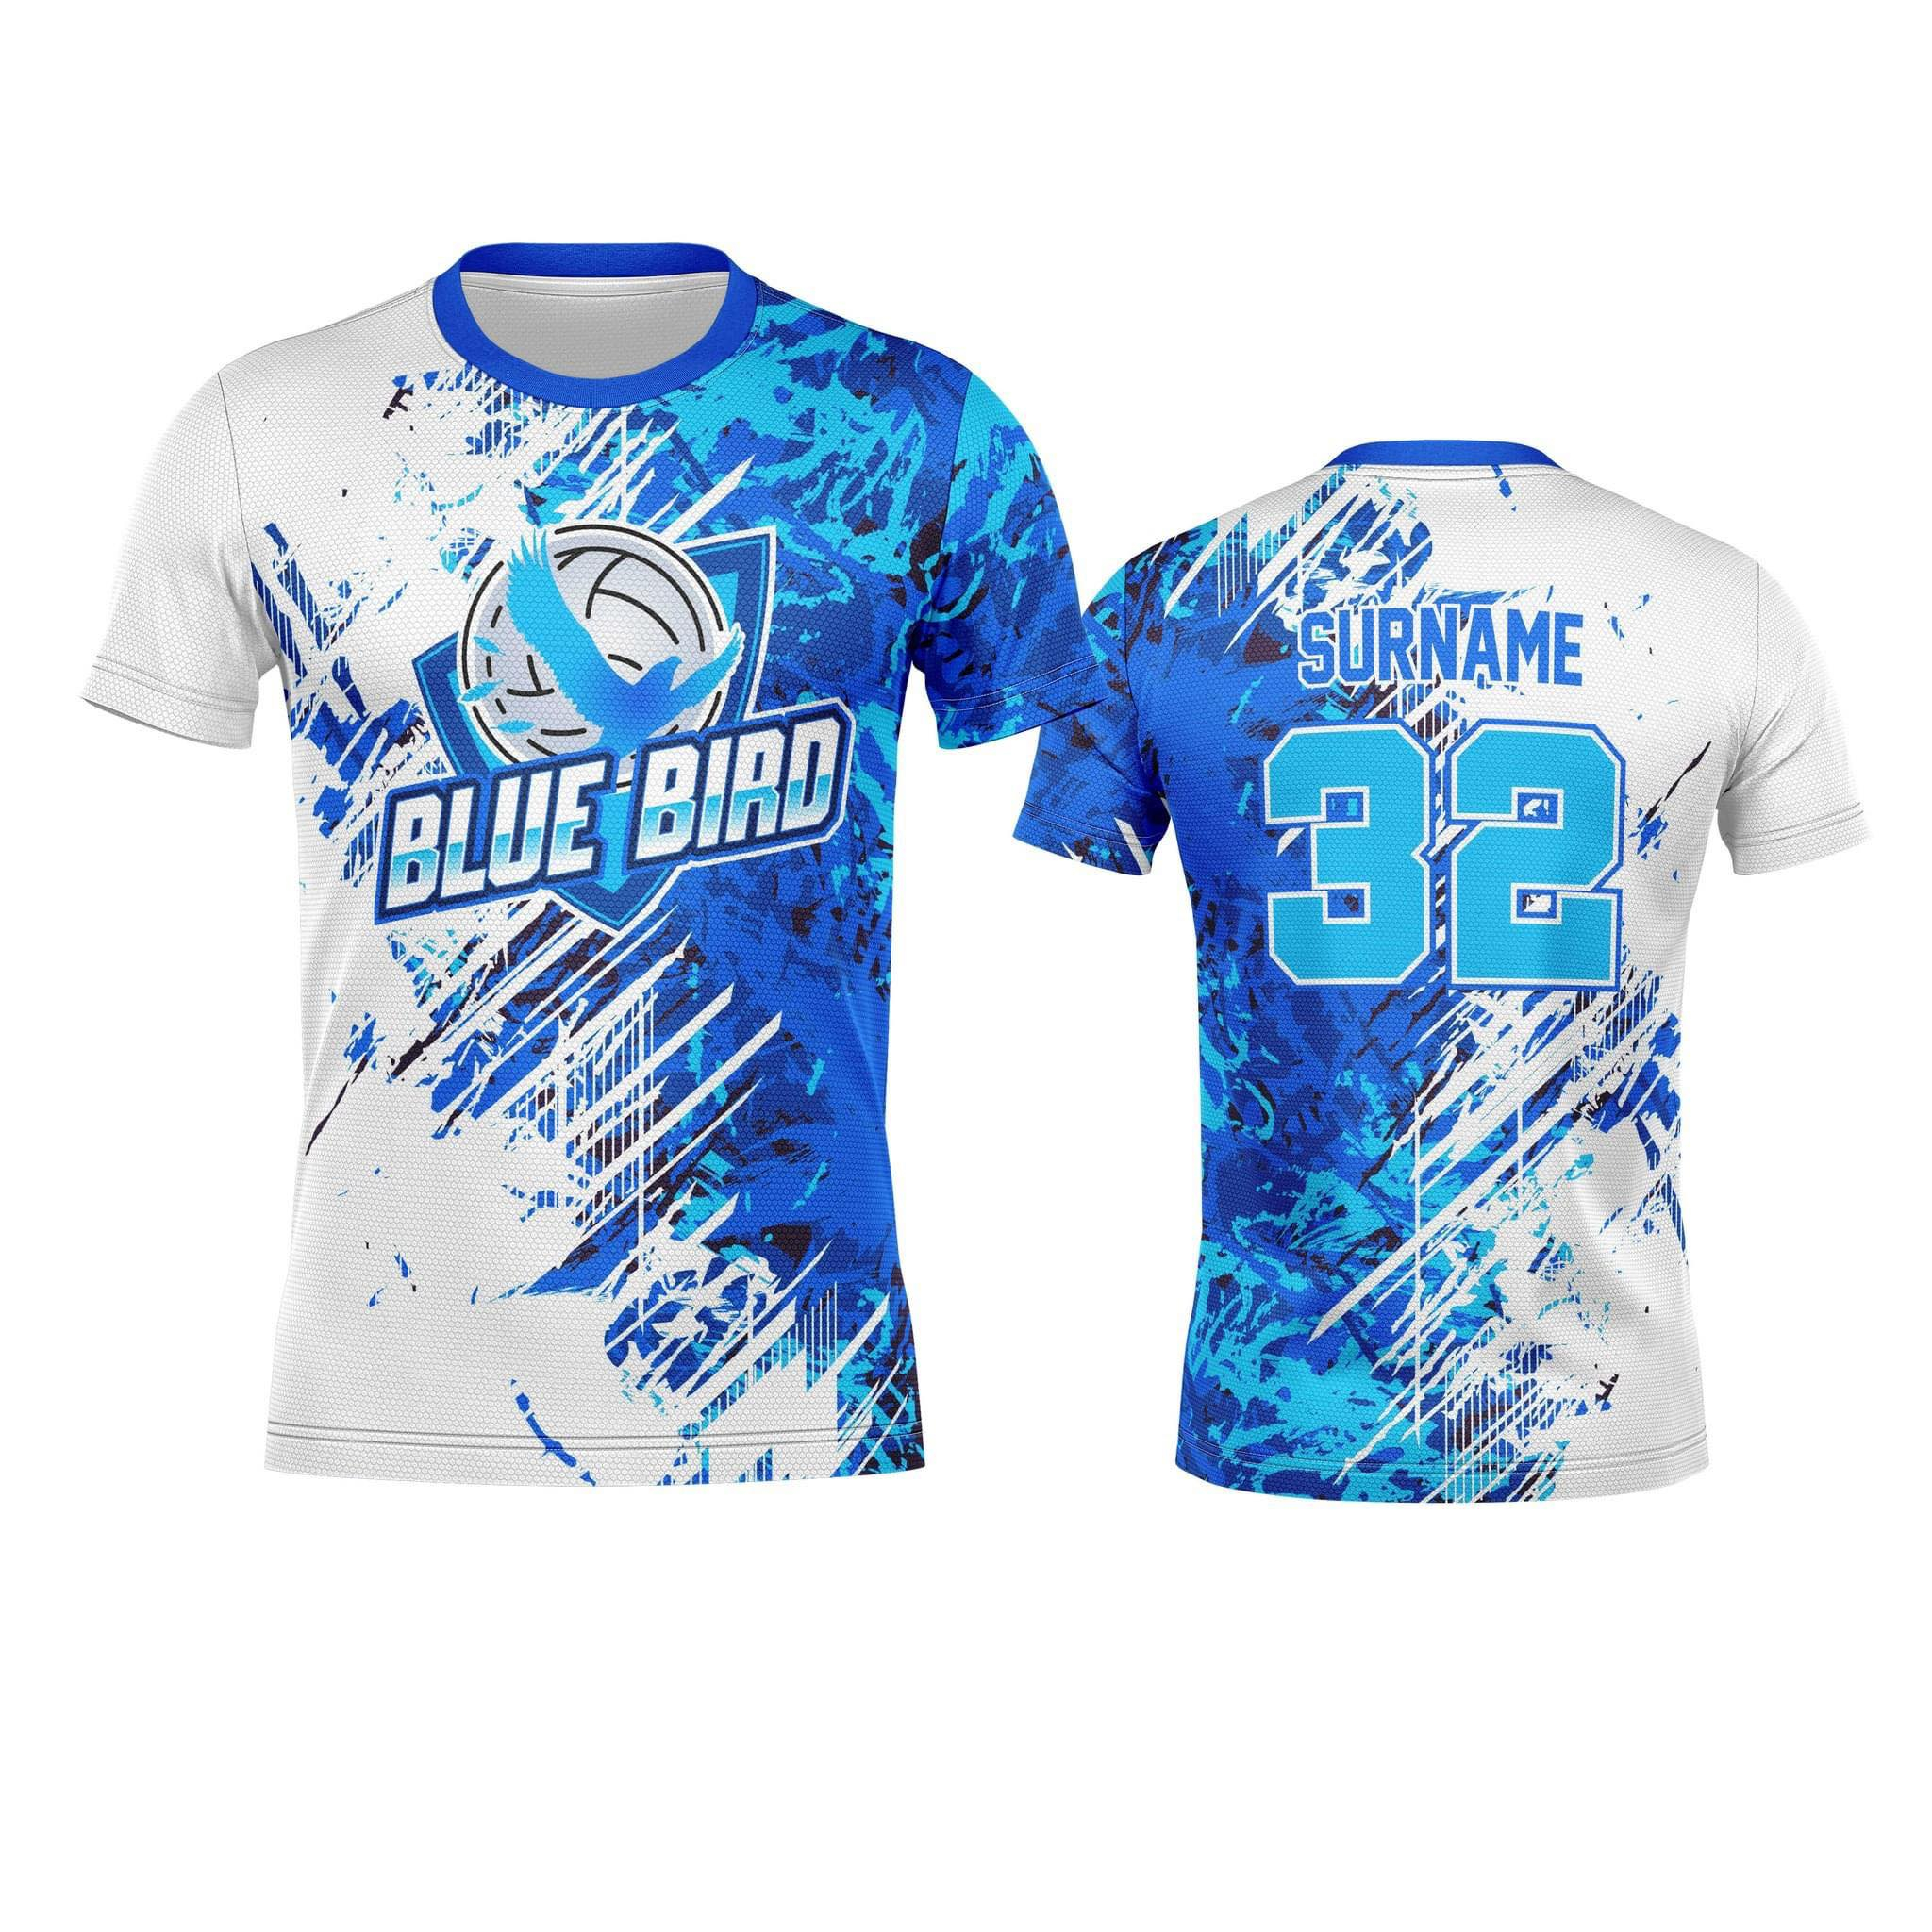 NORTHZONE Slovenia Teal New Design 2021 Jersey Full Sublimated